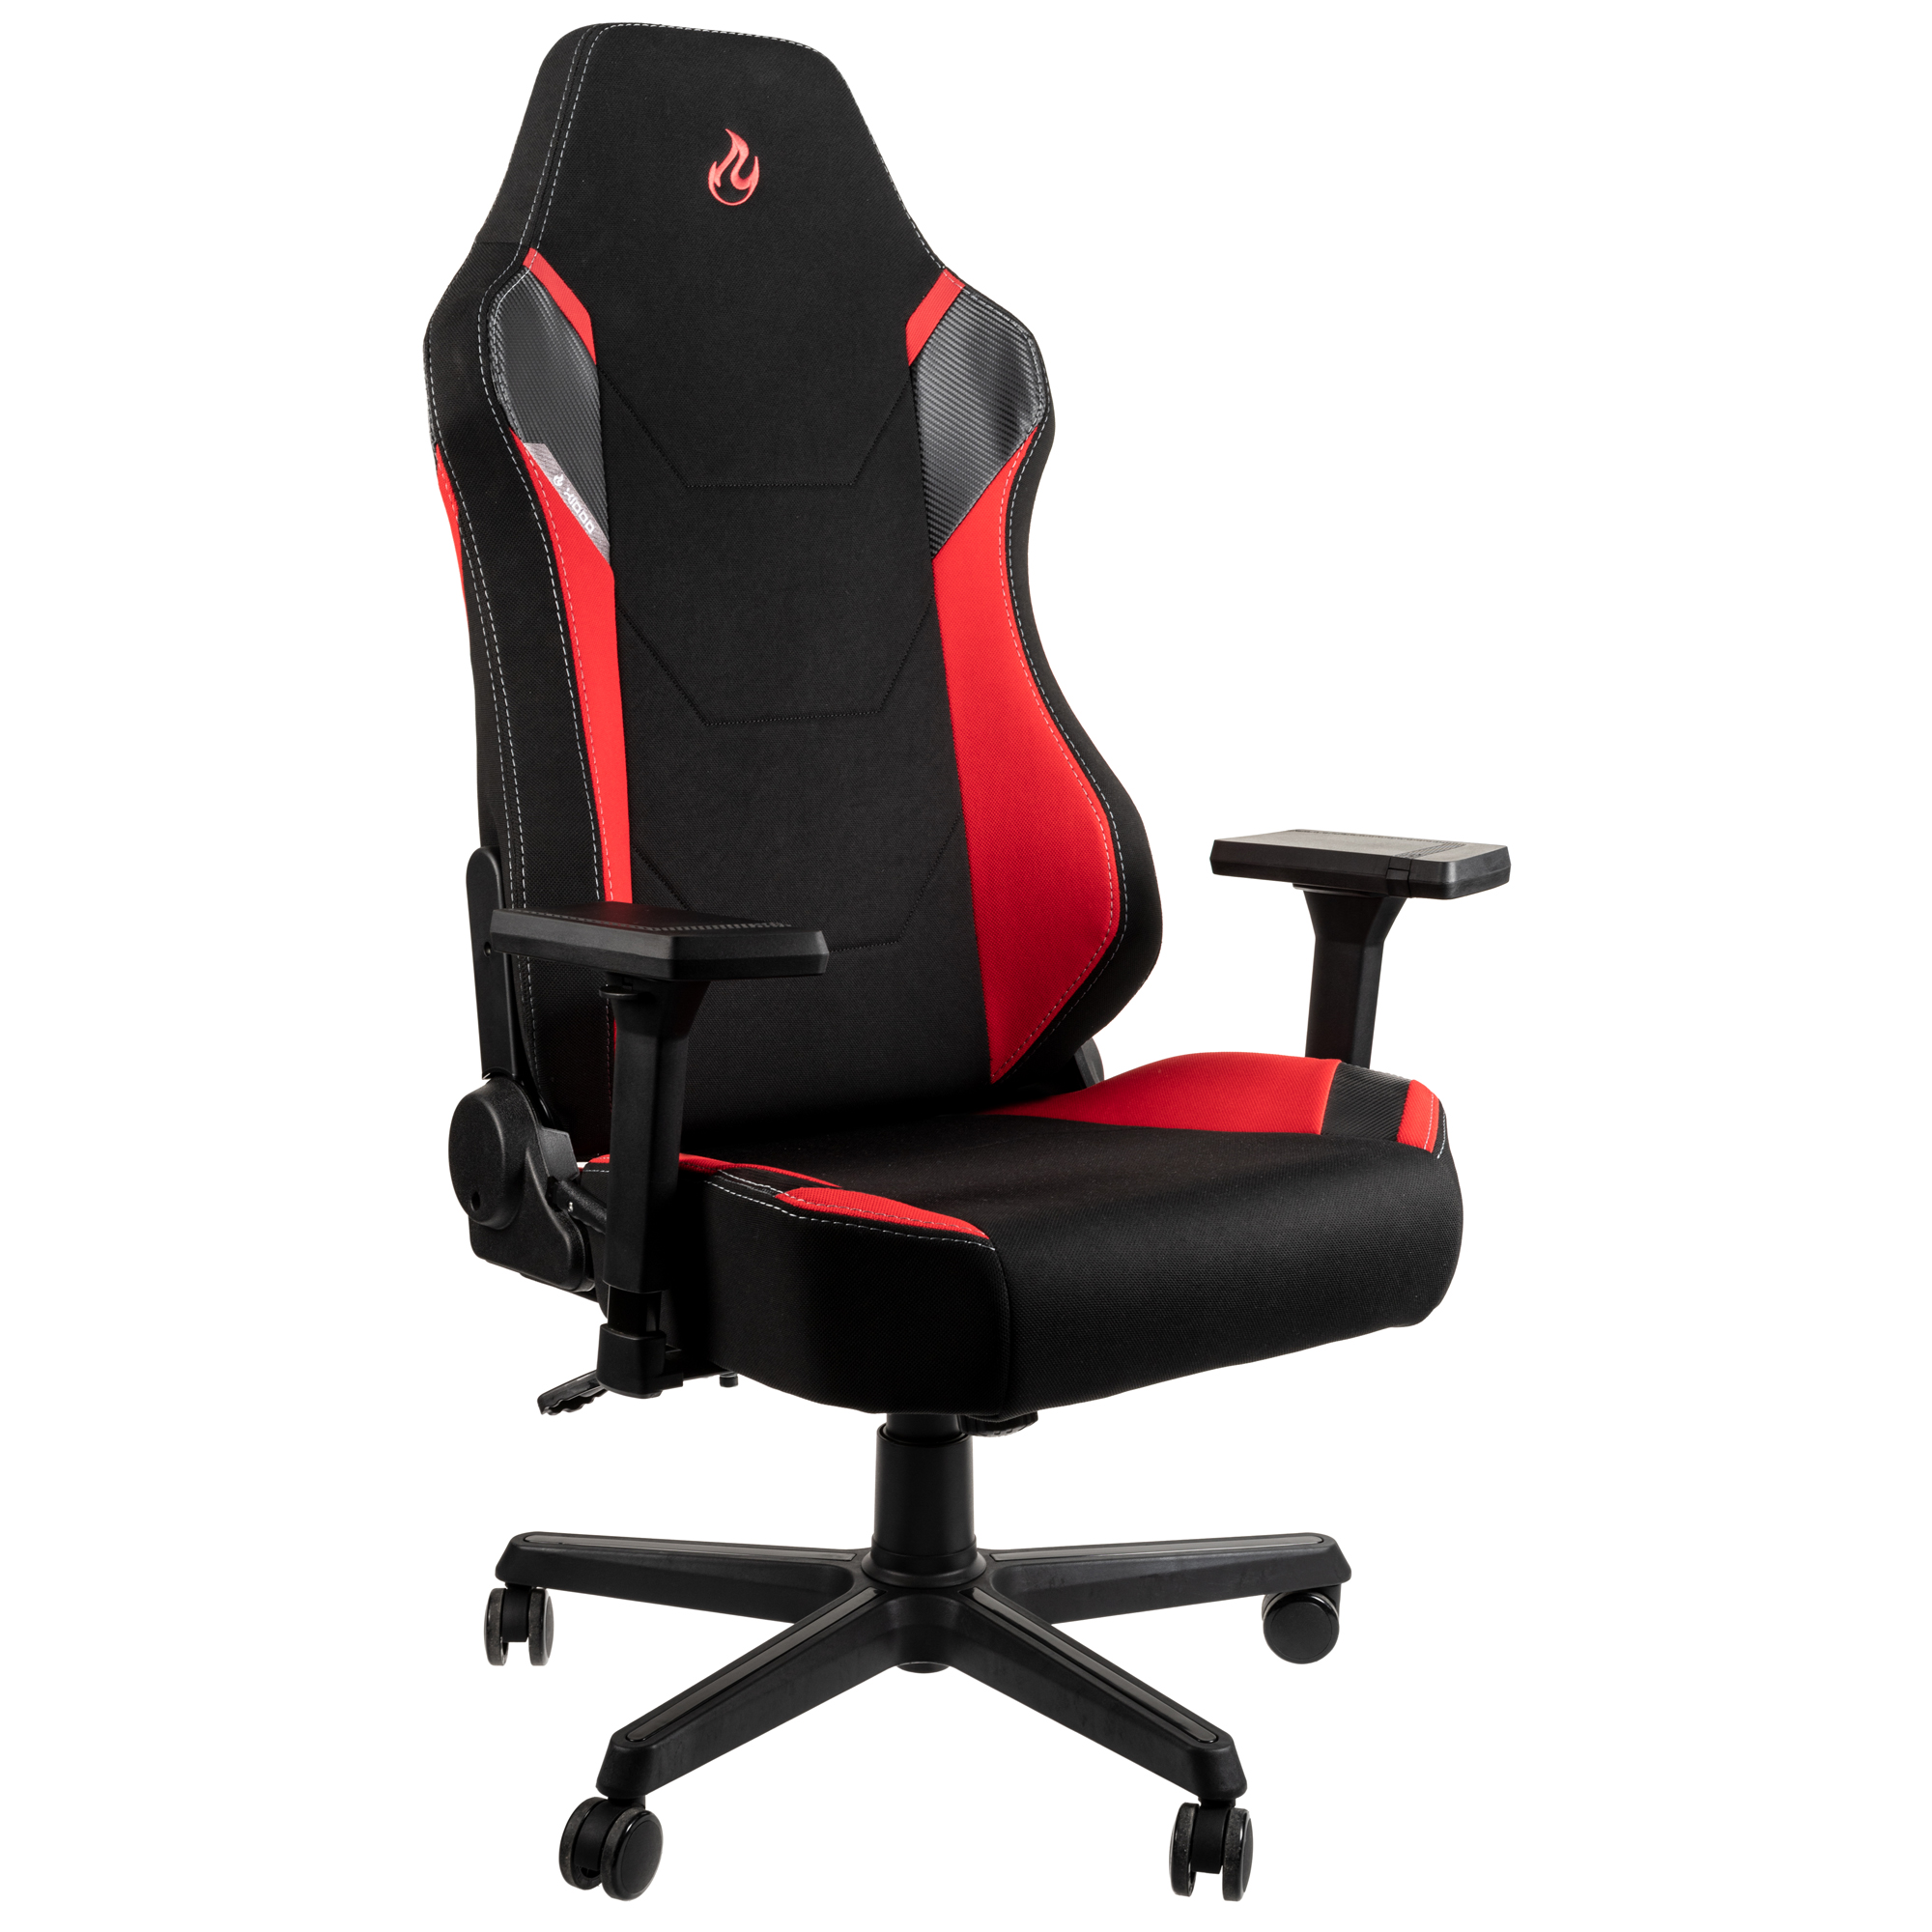 Nitro Concepts - X1000 Gaming Chair - Black / Red